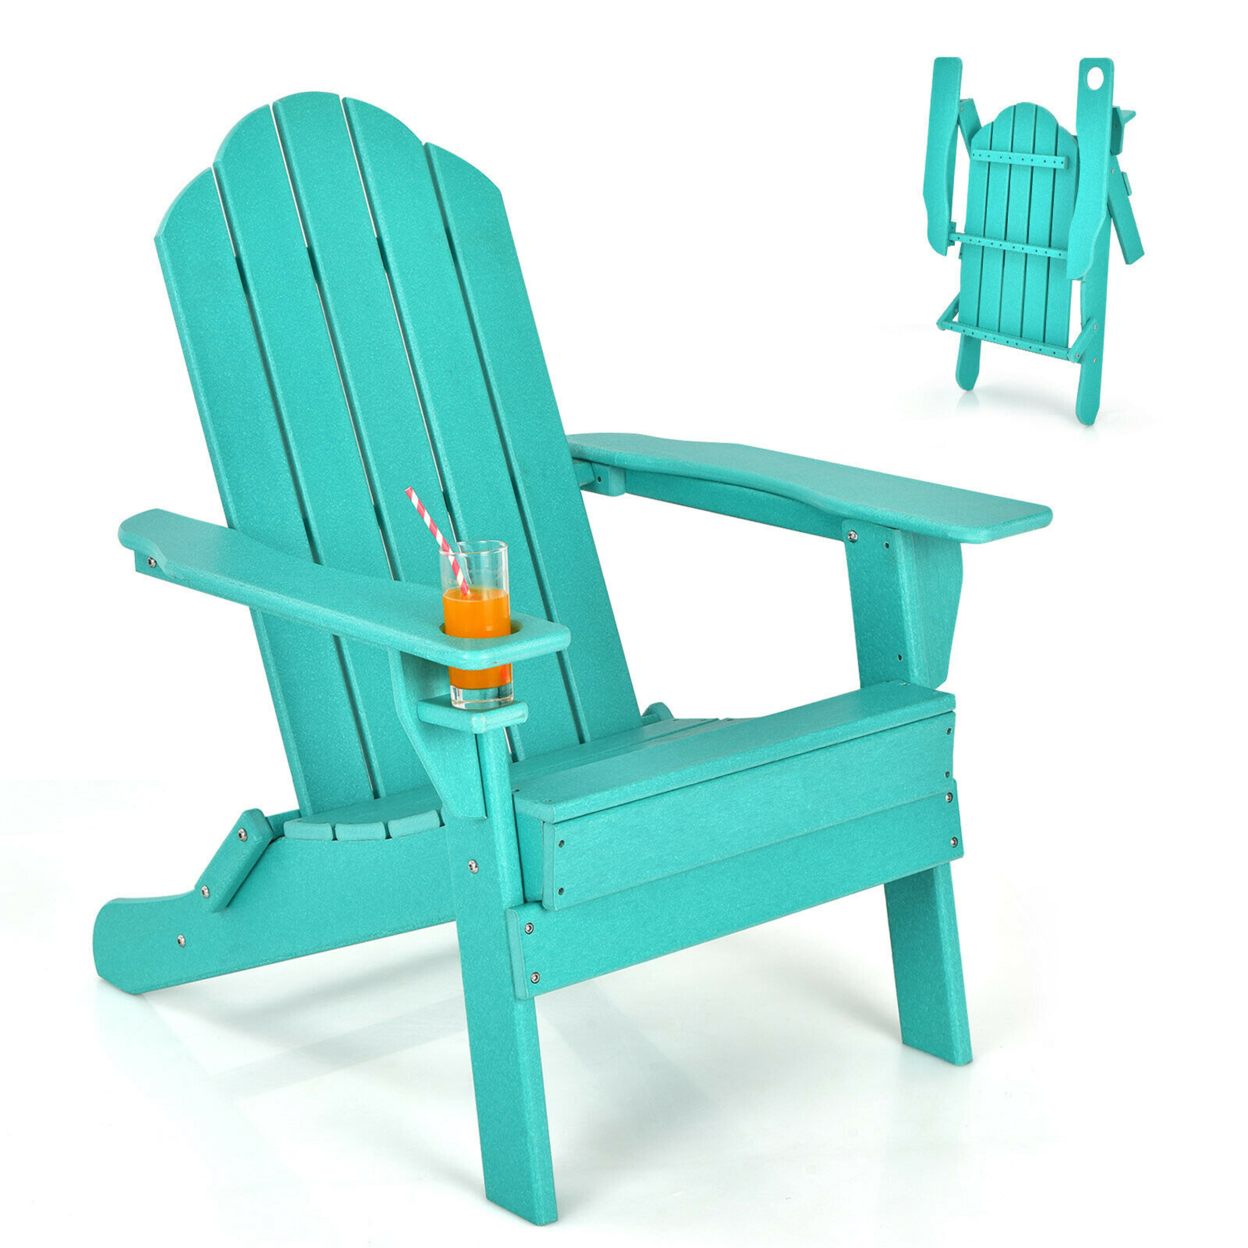 Patio Folding Adirondack Chair Weather Resistant Cup Holder Yard - Turquoise